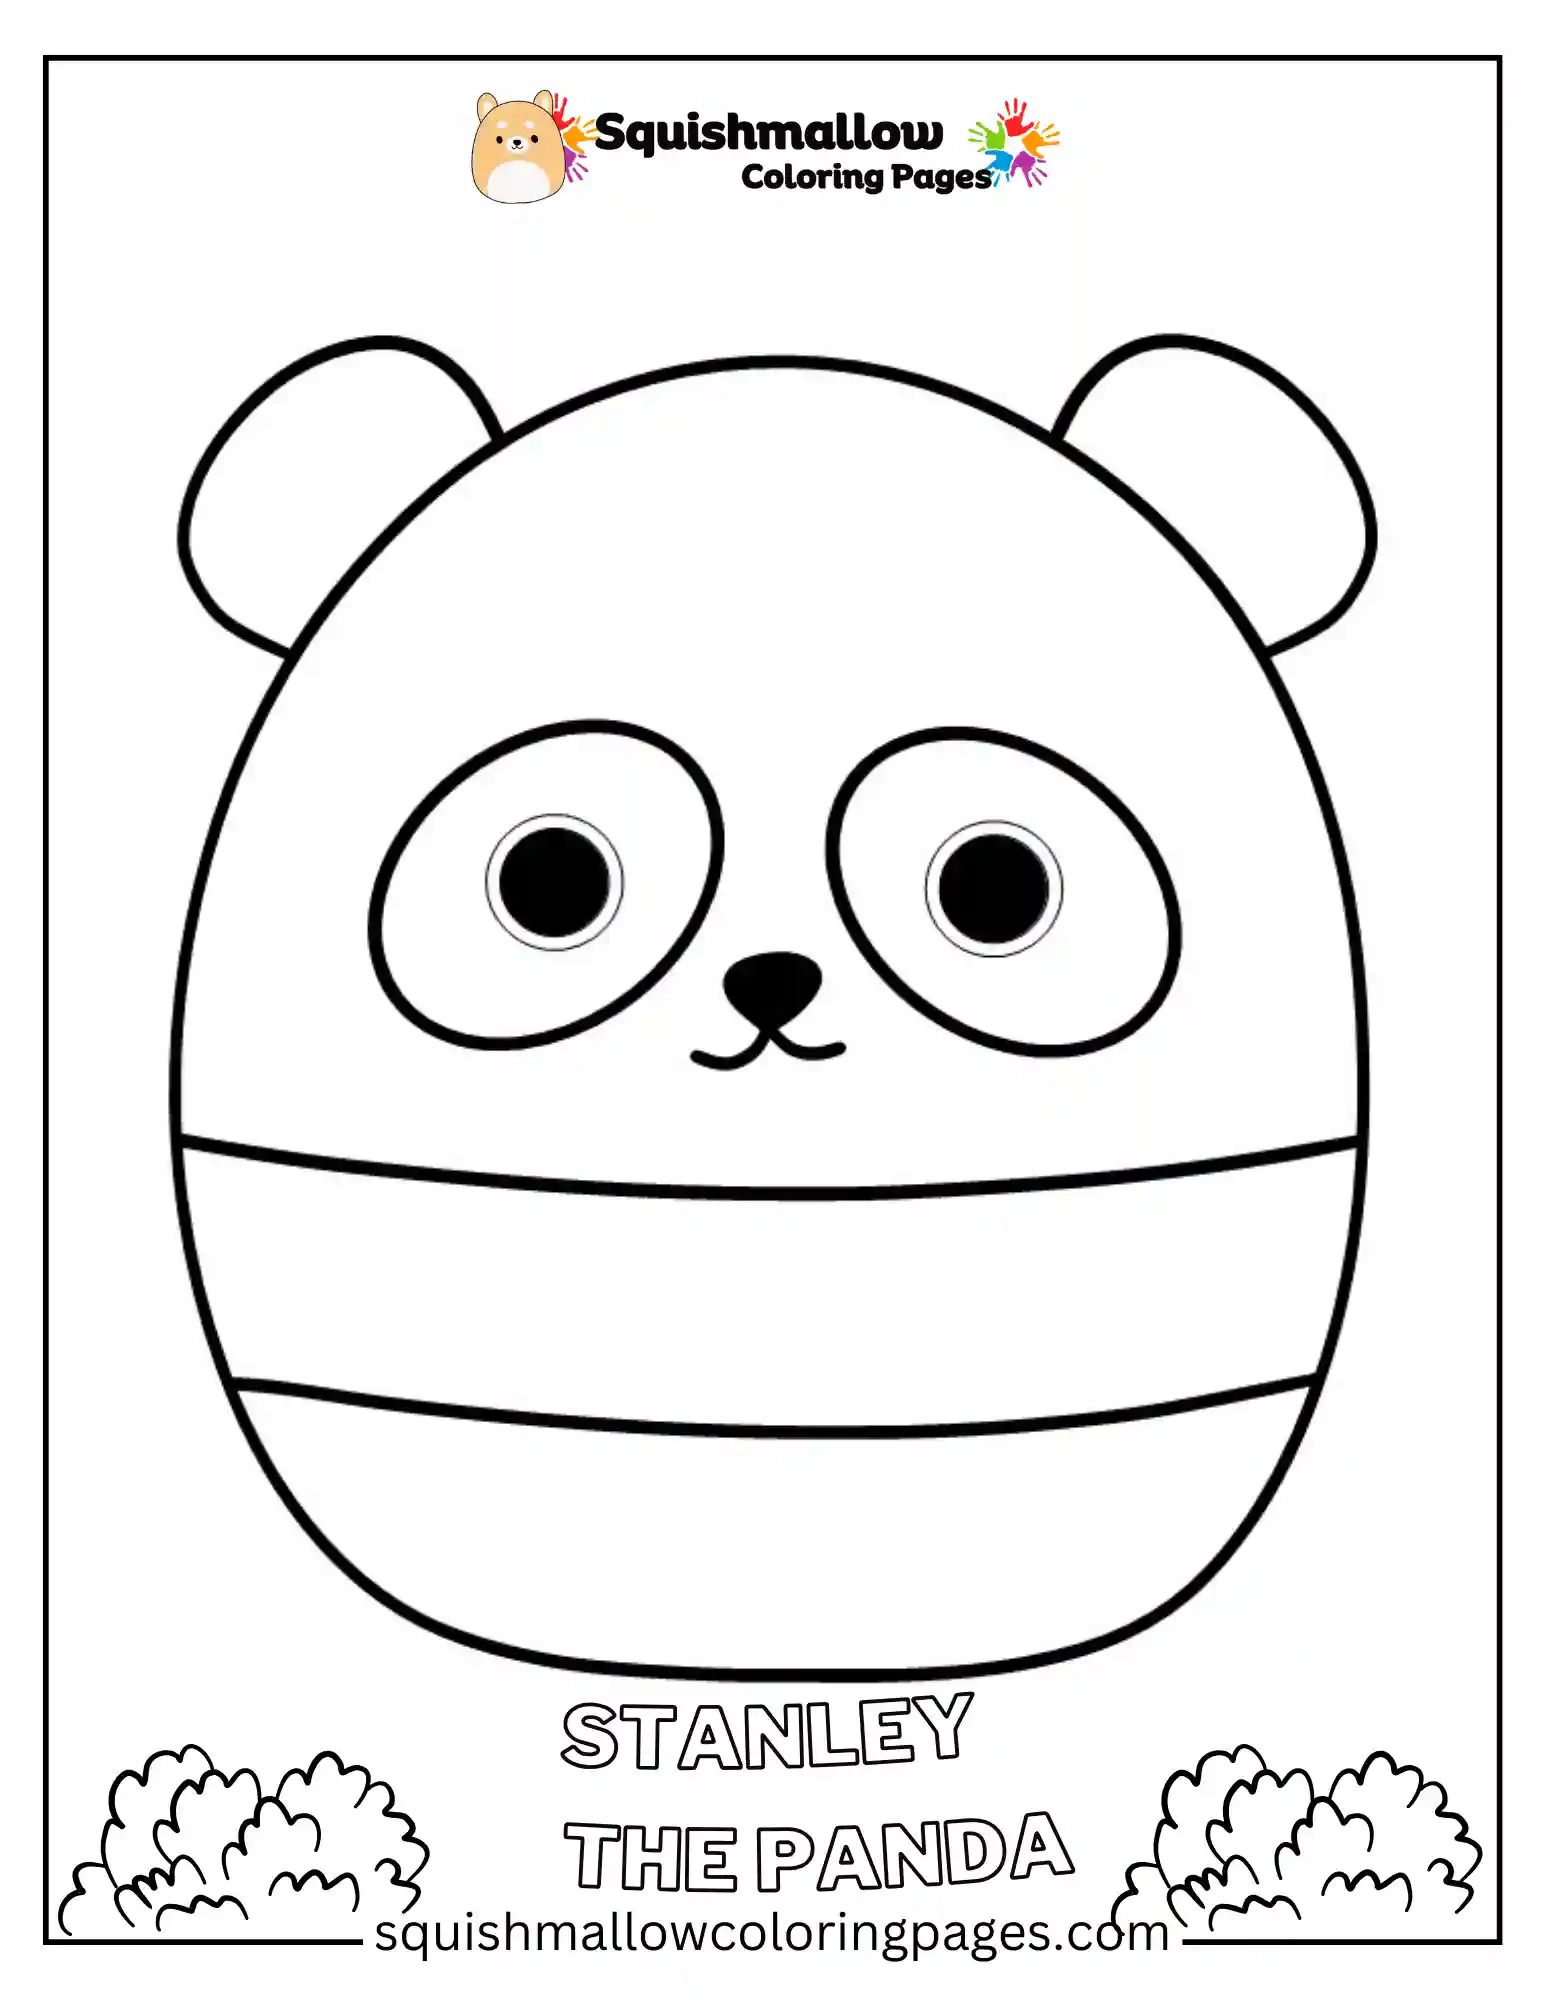 Stanley The Panda Squishmallow Coloring Pages